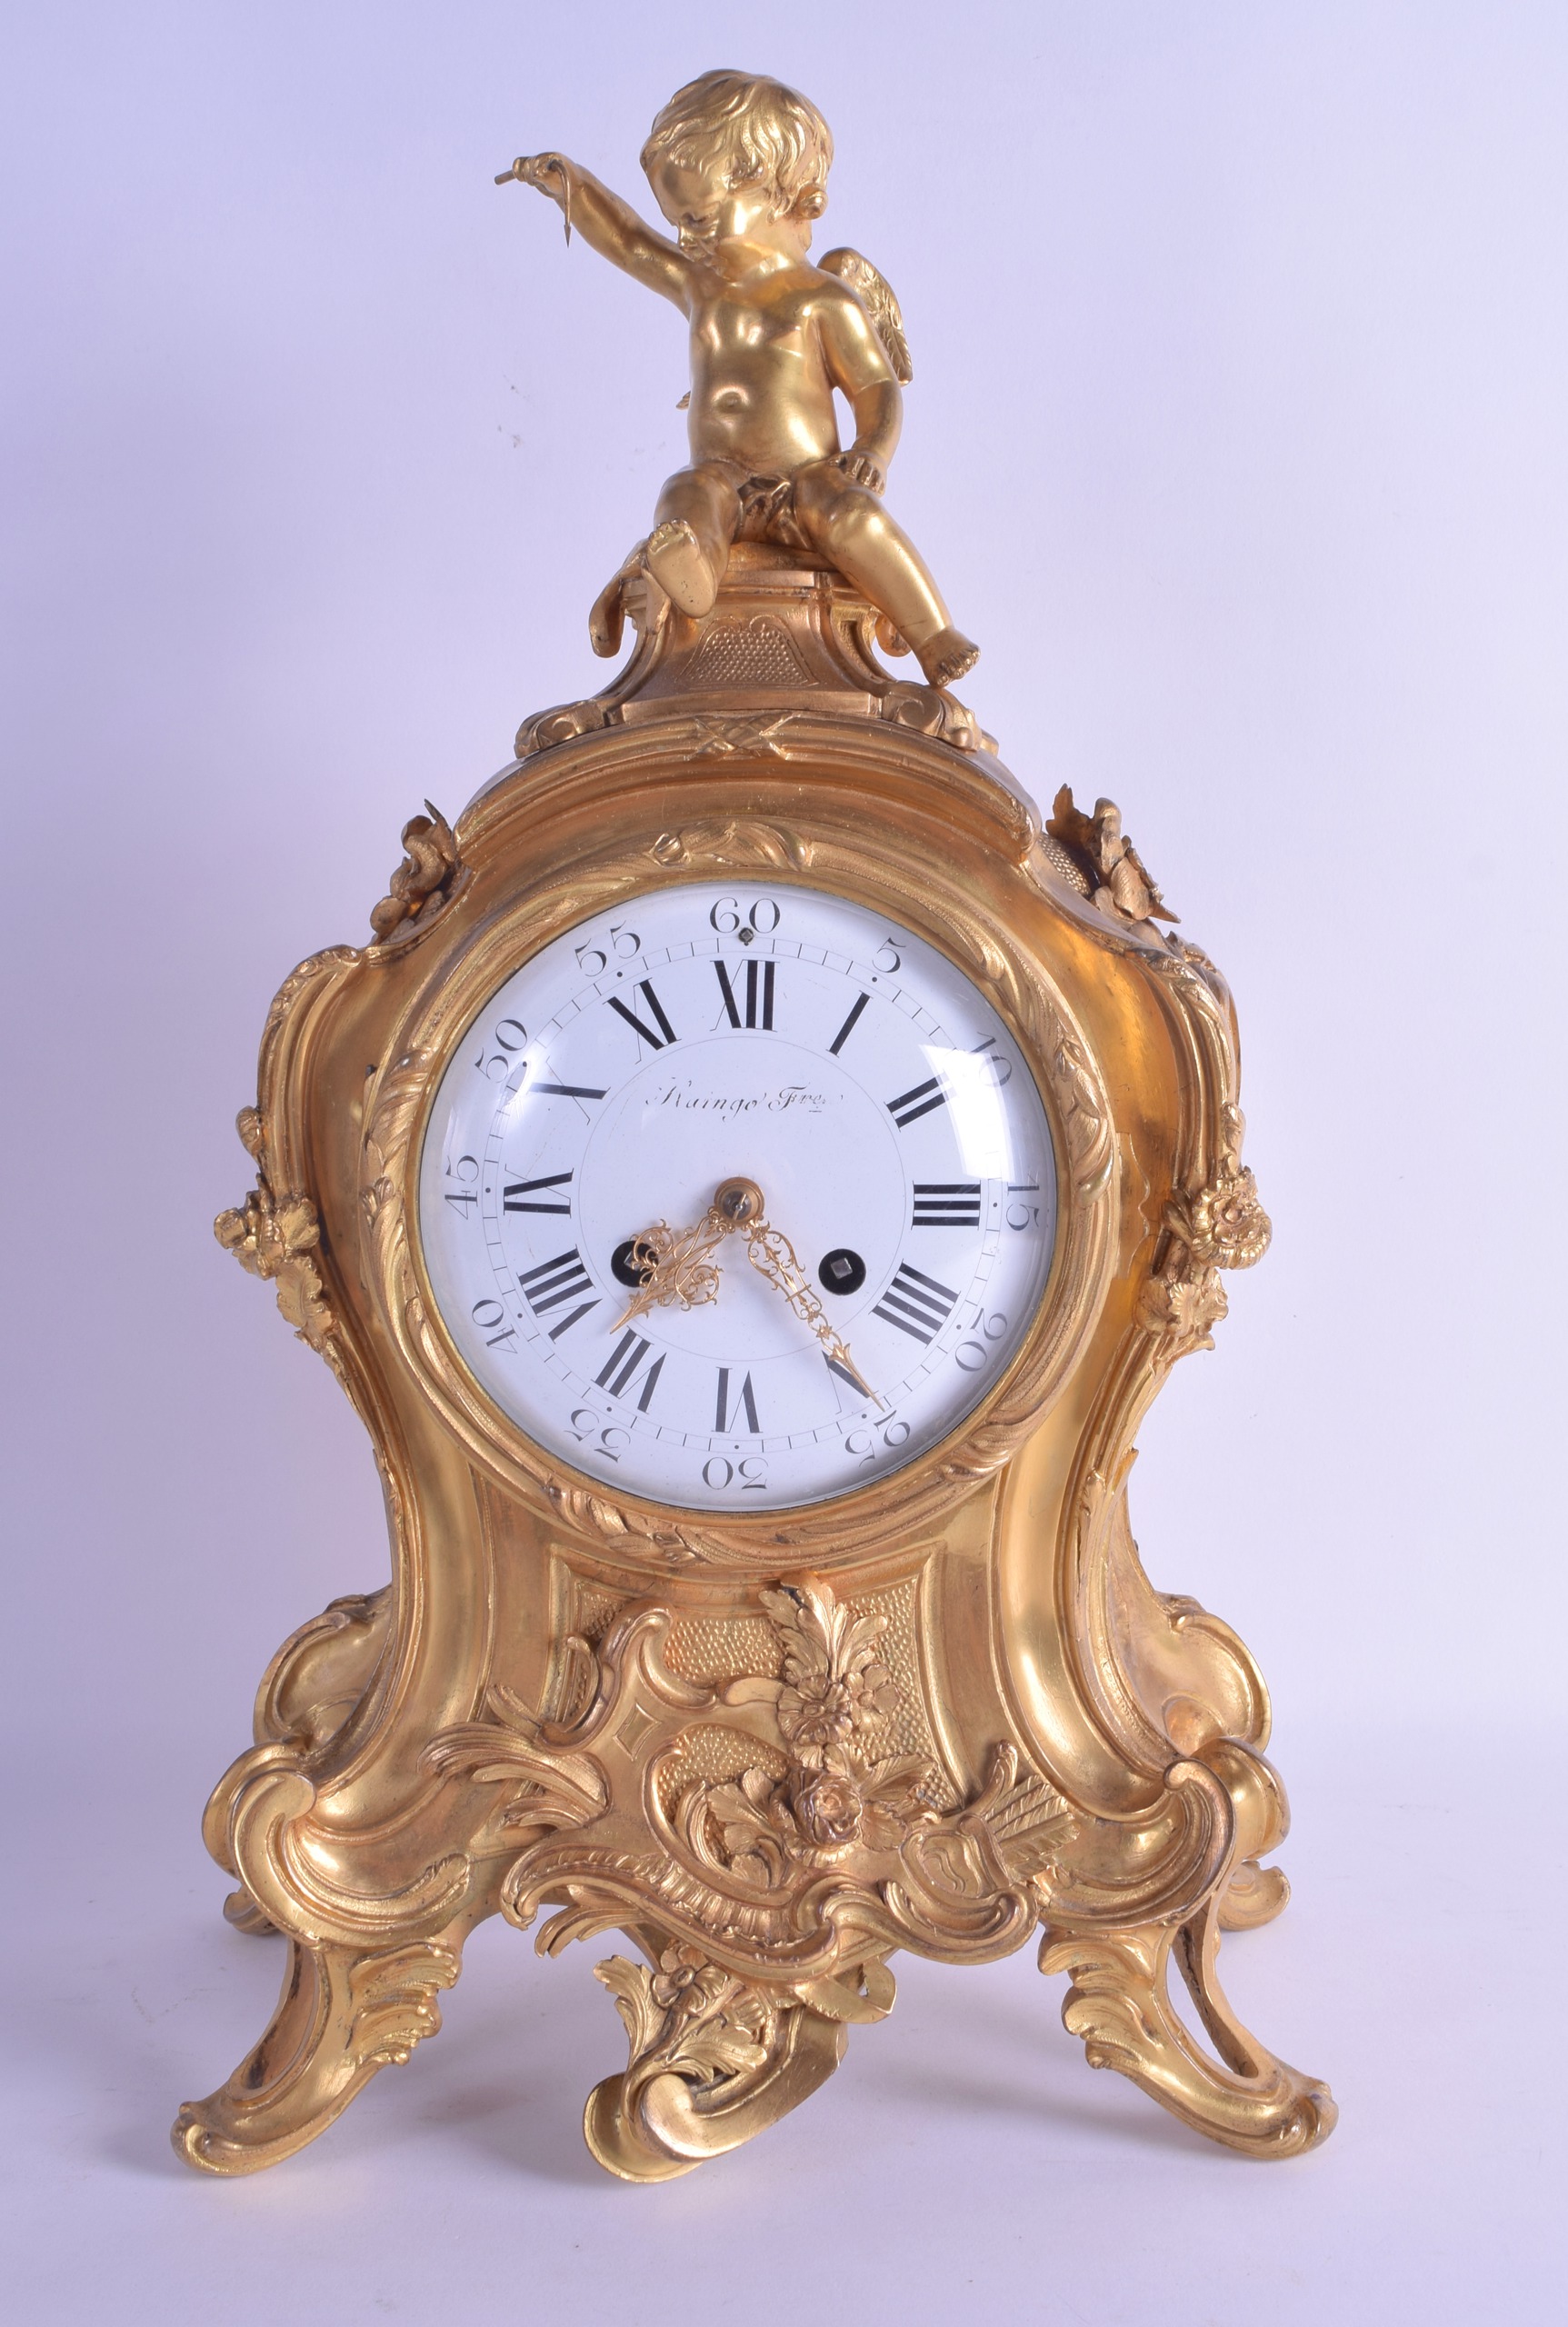 A MID 19TH CENTURY FRENCH ORMOLU ROCOCO MANTEL CLOCK modelled with a seated cupid upon a scrolling